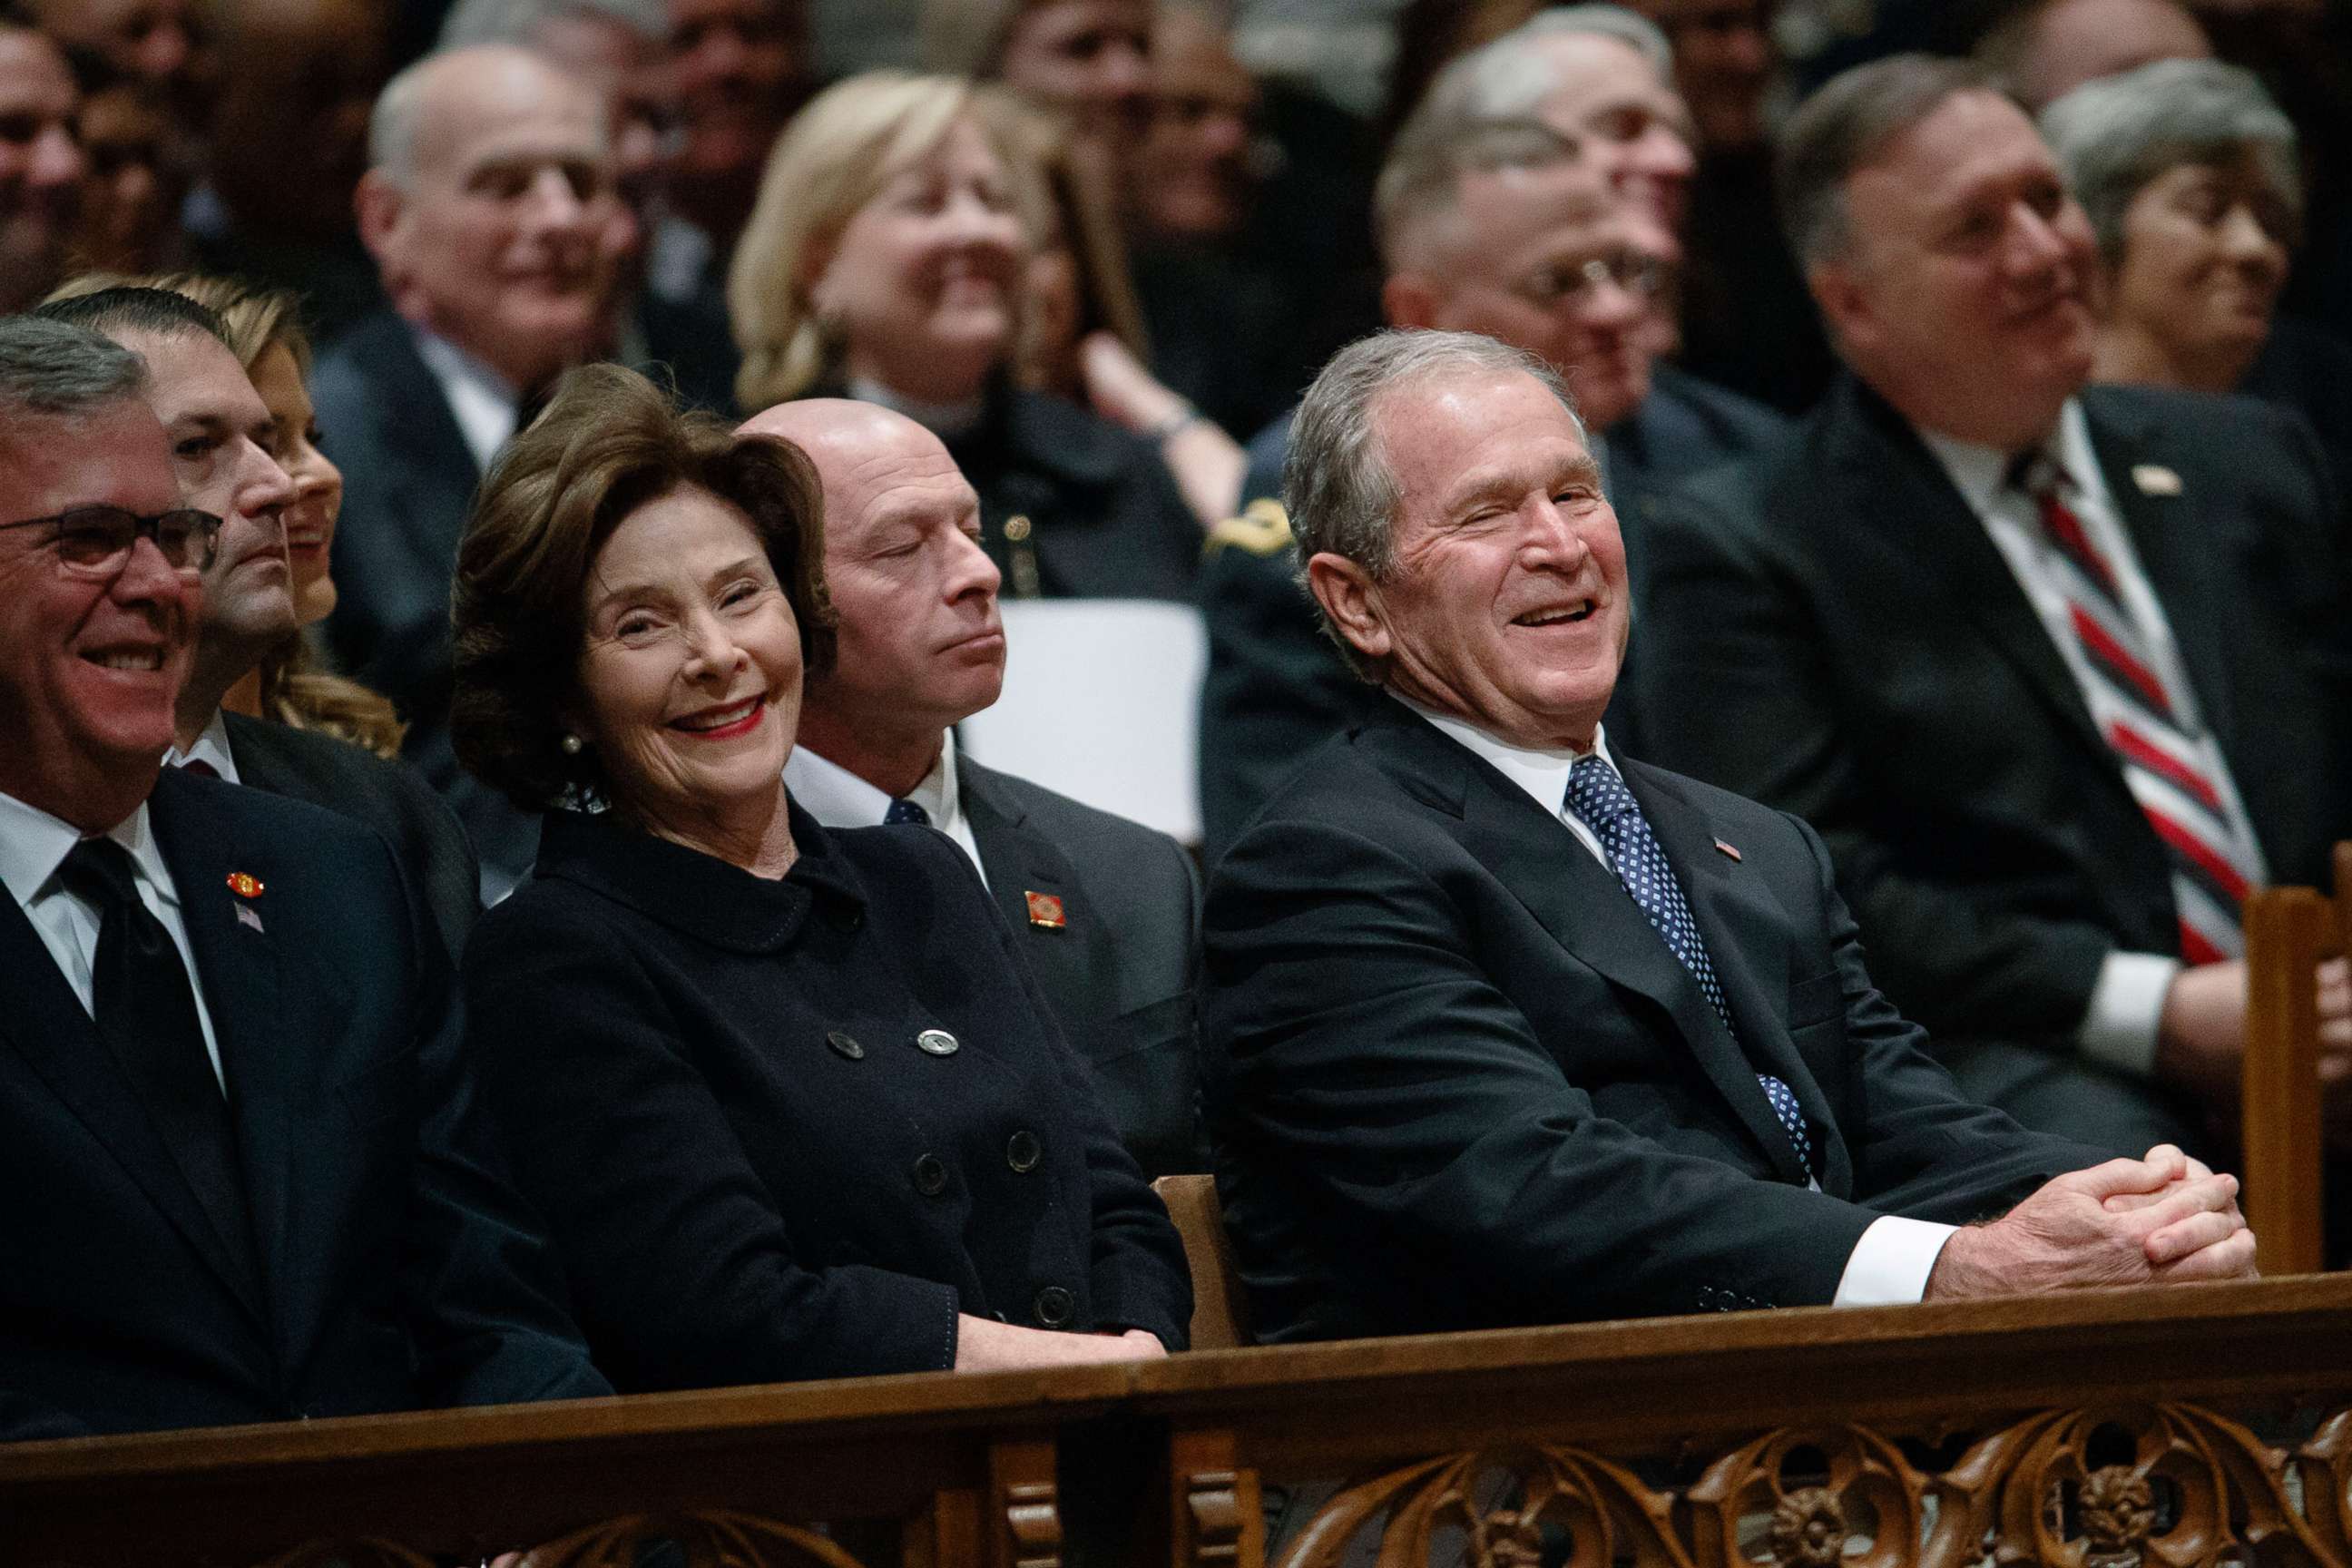 Who's Who In The Bush Family At Wednesday's State Funeral : NPR